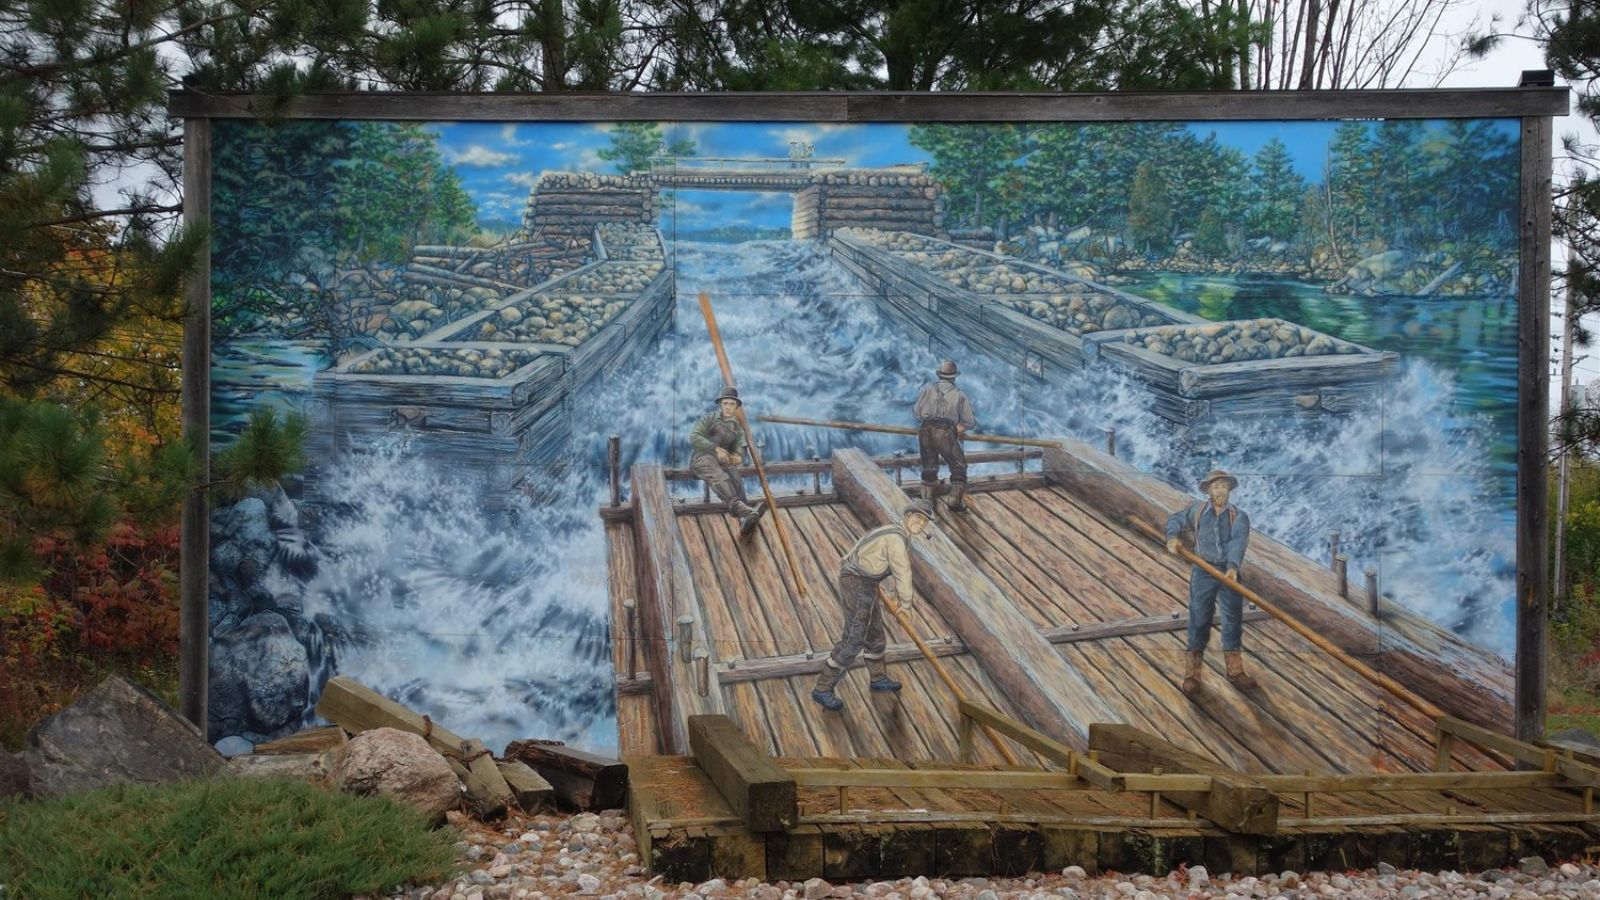 Photo of the Timber Raft mural.